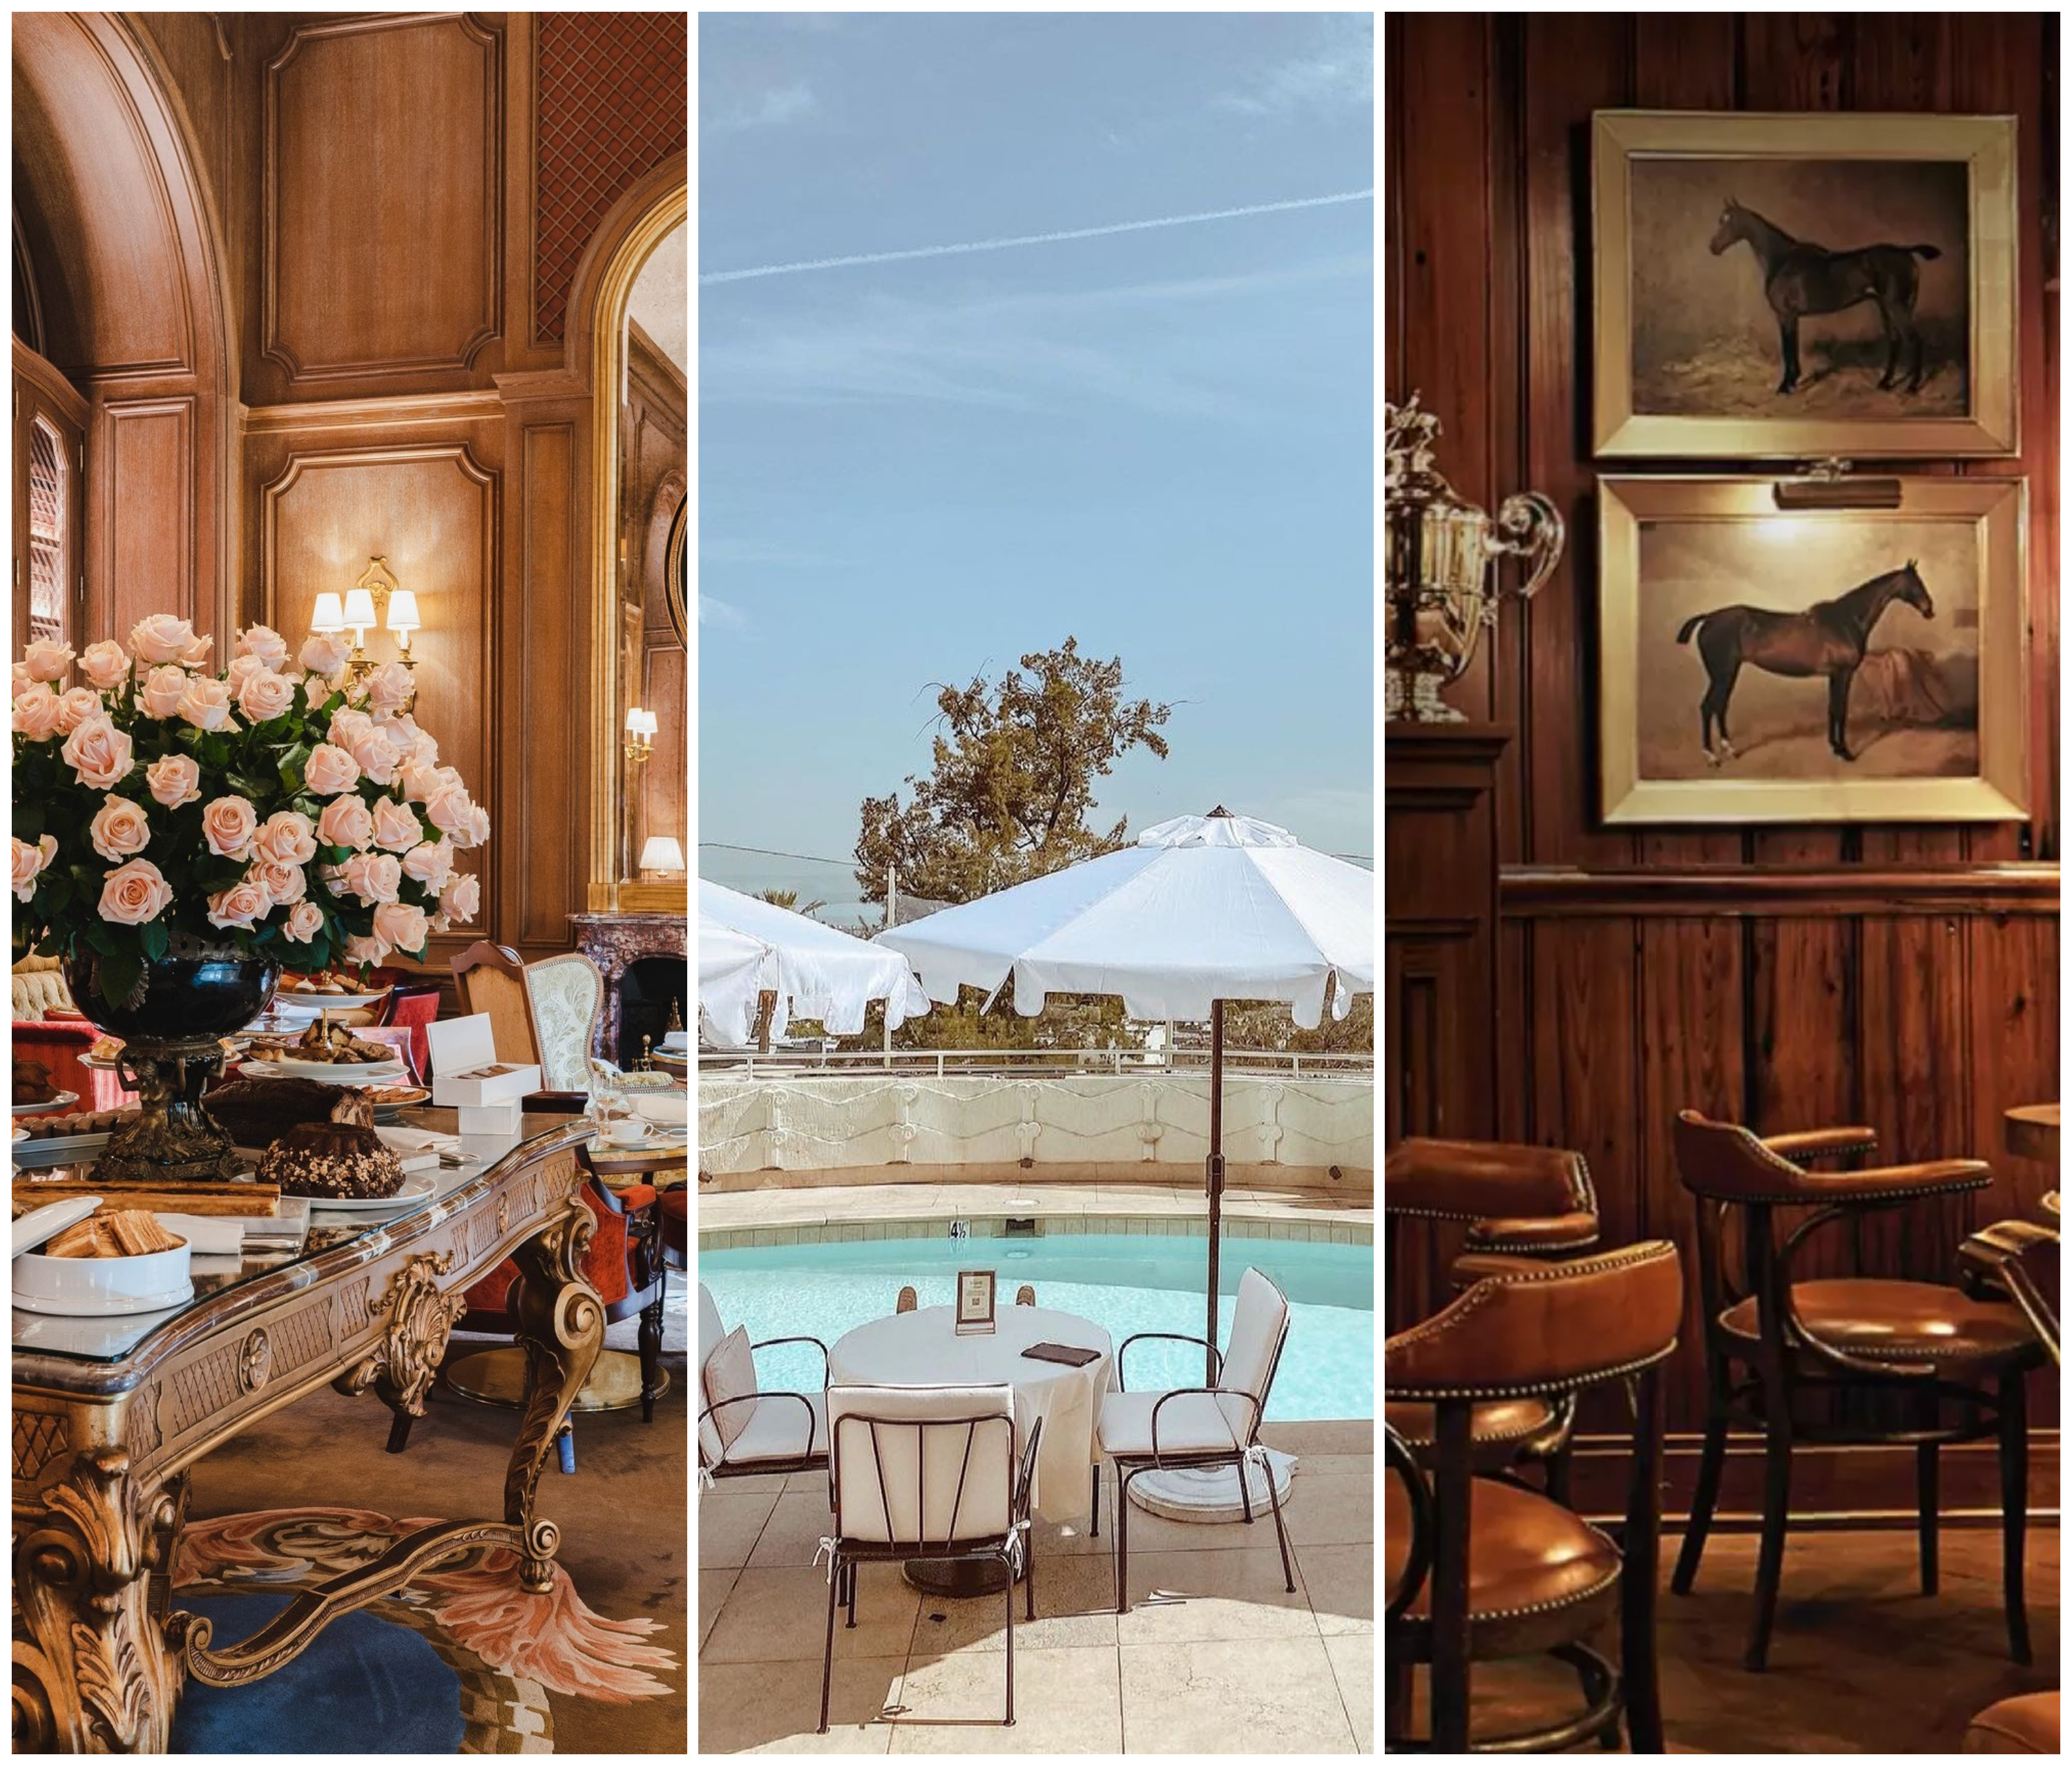 Celebrities love visiting these restaurants, bars and hotels in world-class cities like London, Paris, New York City and Los Angeles. Photos: Ritz Paris; Sunset Tower Hotel/Facebook; Ralph Lauren